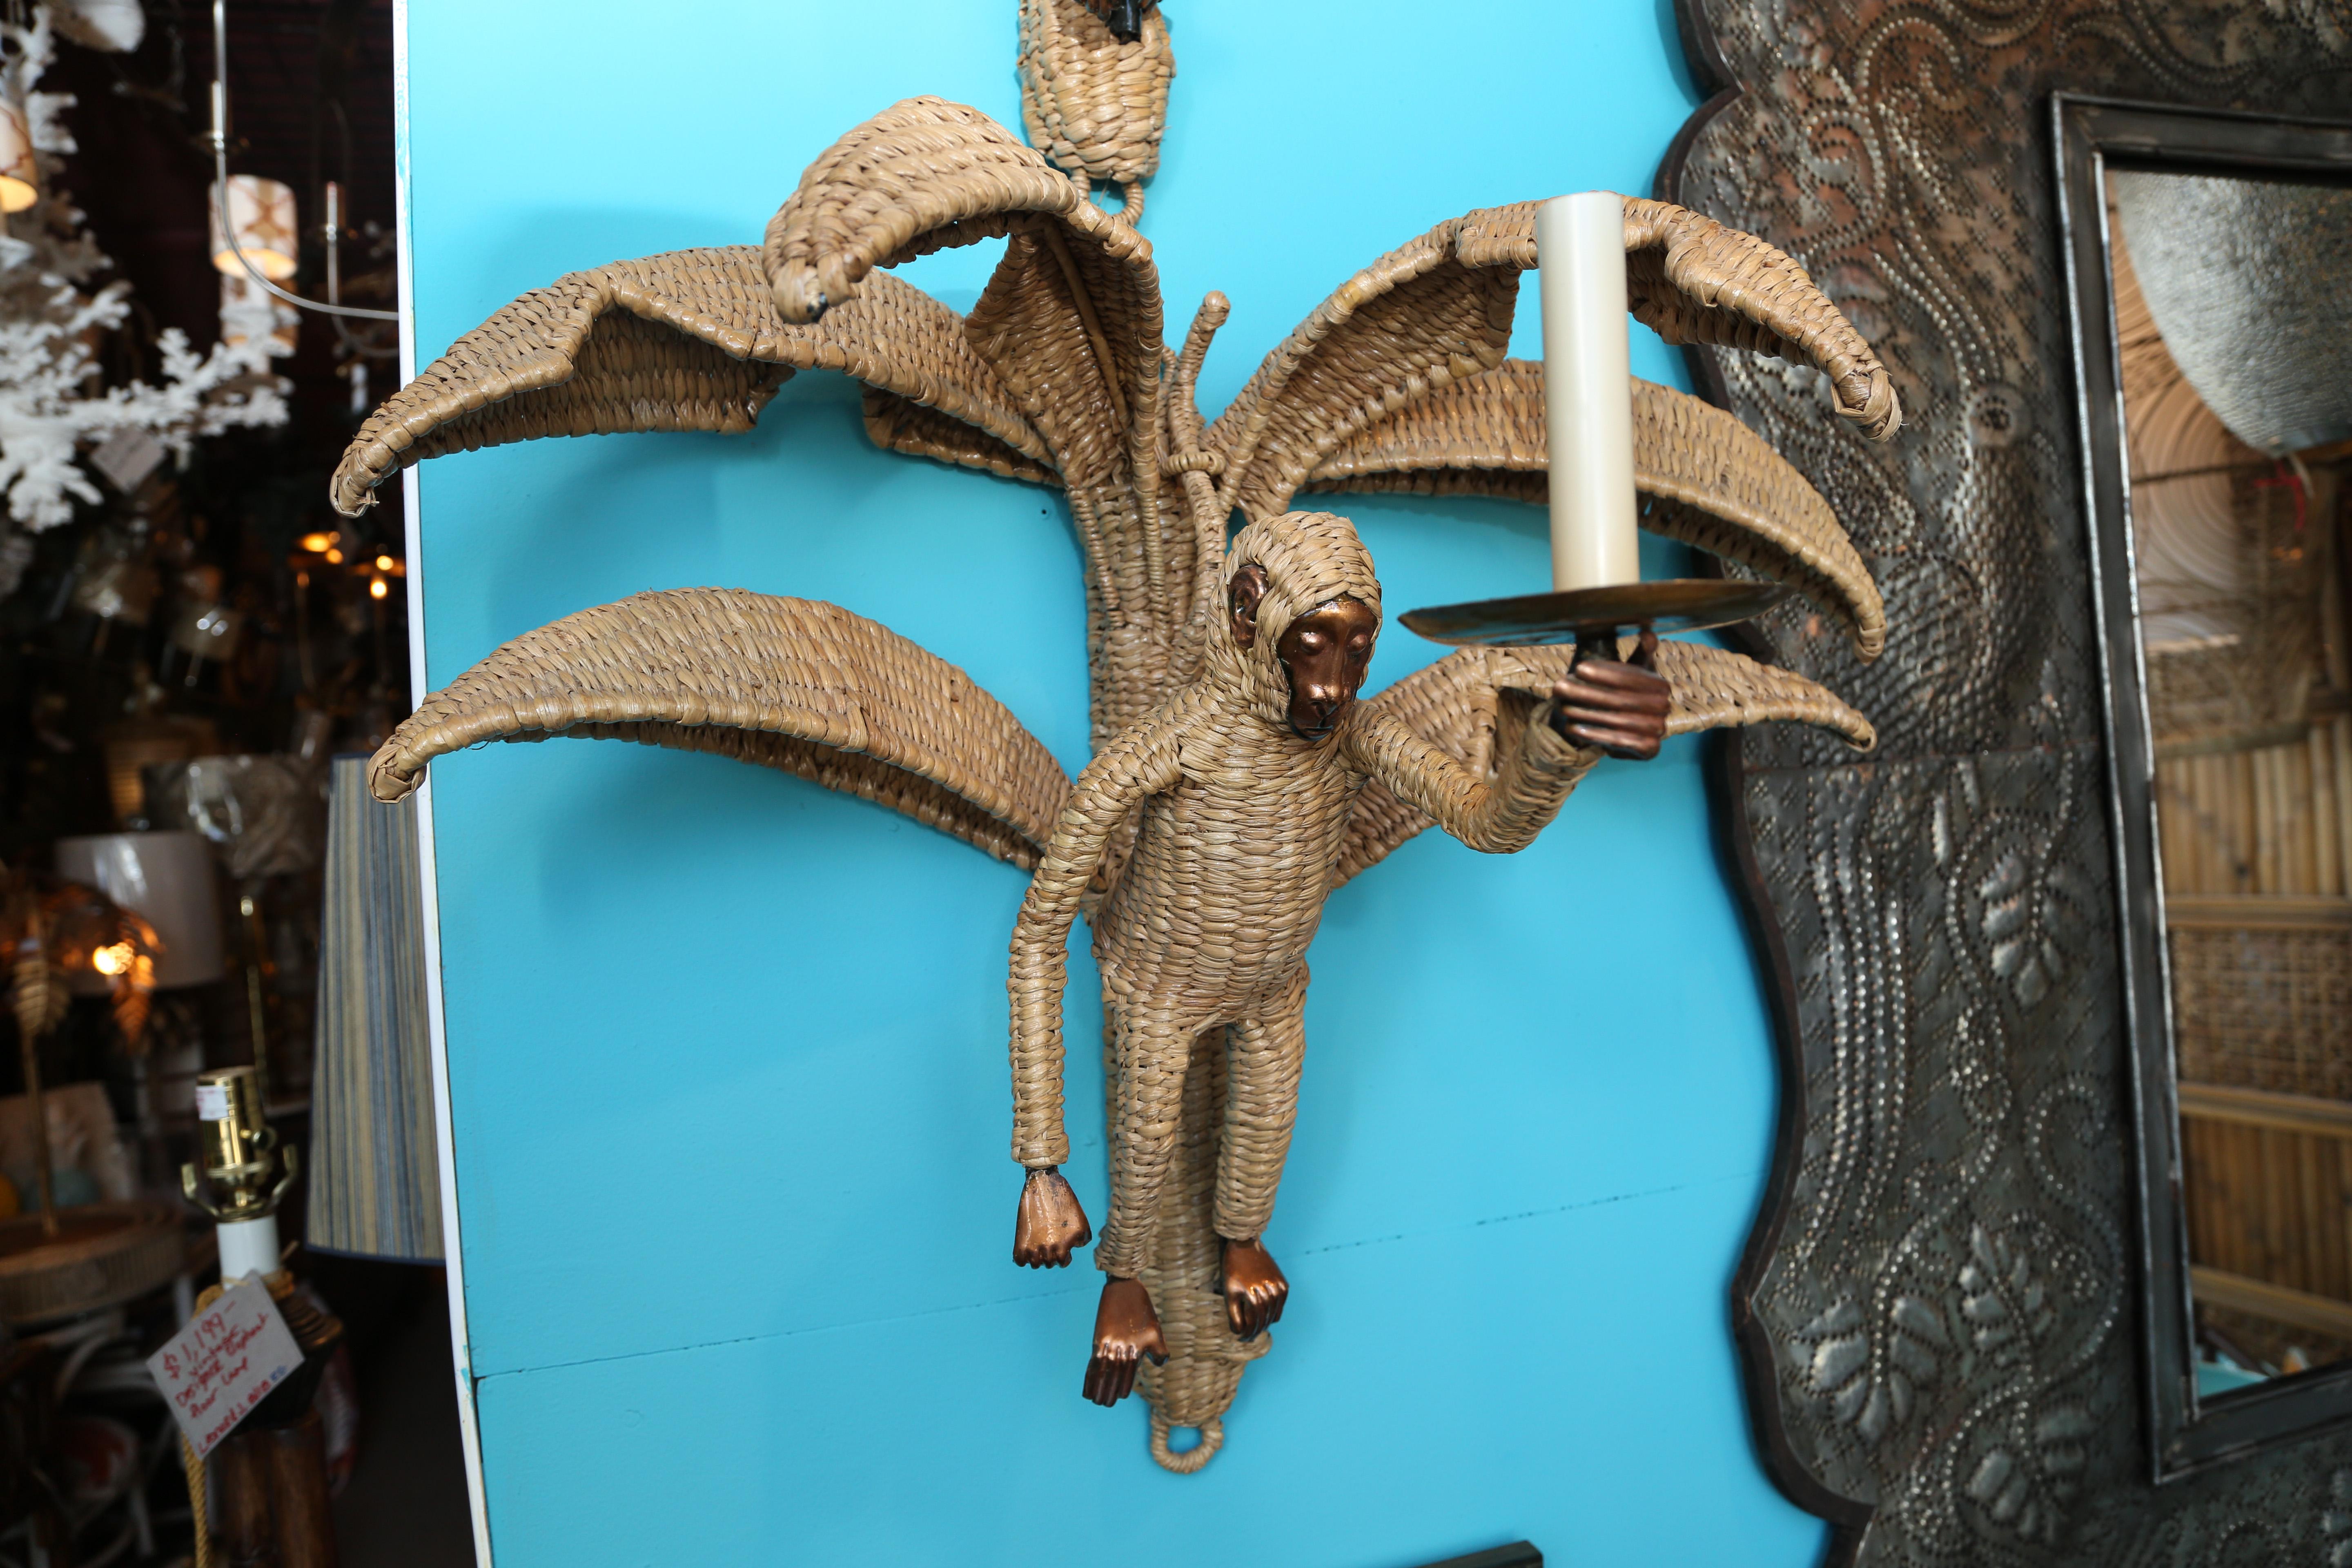 Pair of Like New vintage Mario Lopez Torres Monkey sconces $2,899 like new condition pair of Mario Lopez Torres wicker monkey sconces with palm tree leaves, brass faces and feet, hands, and ears. These sconces are constructed of a metal frame